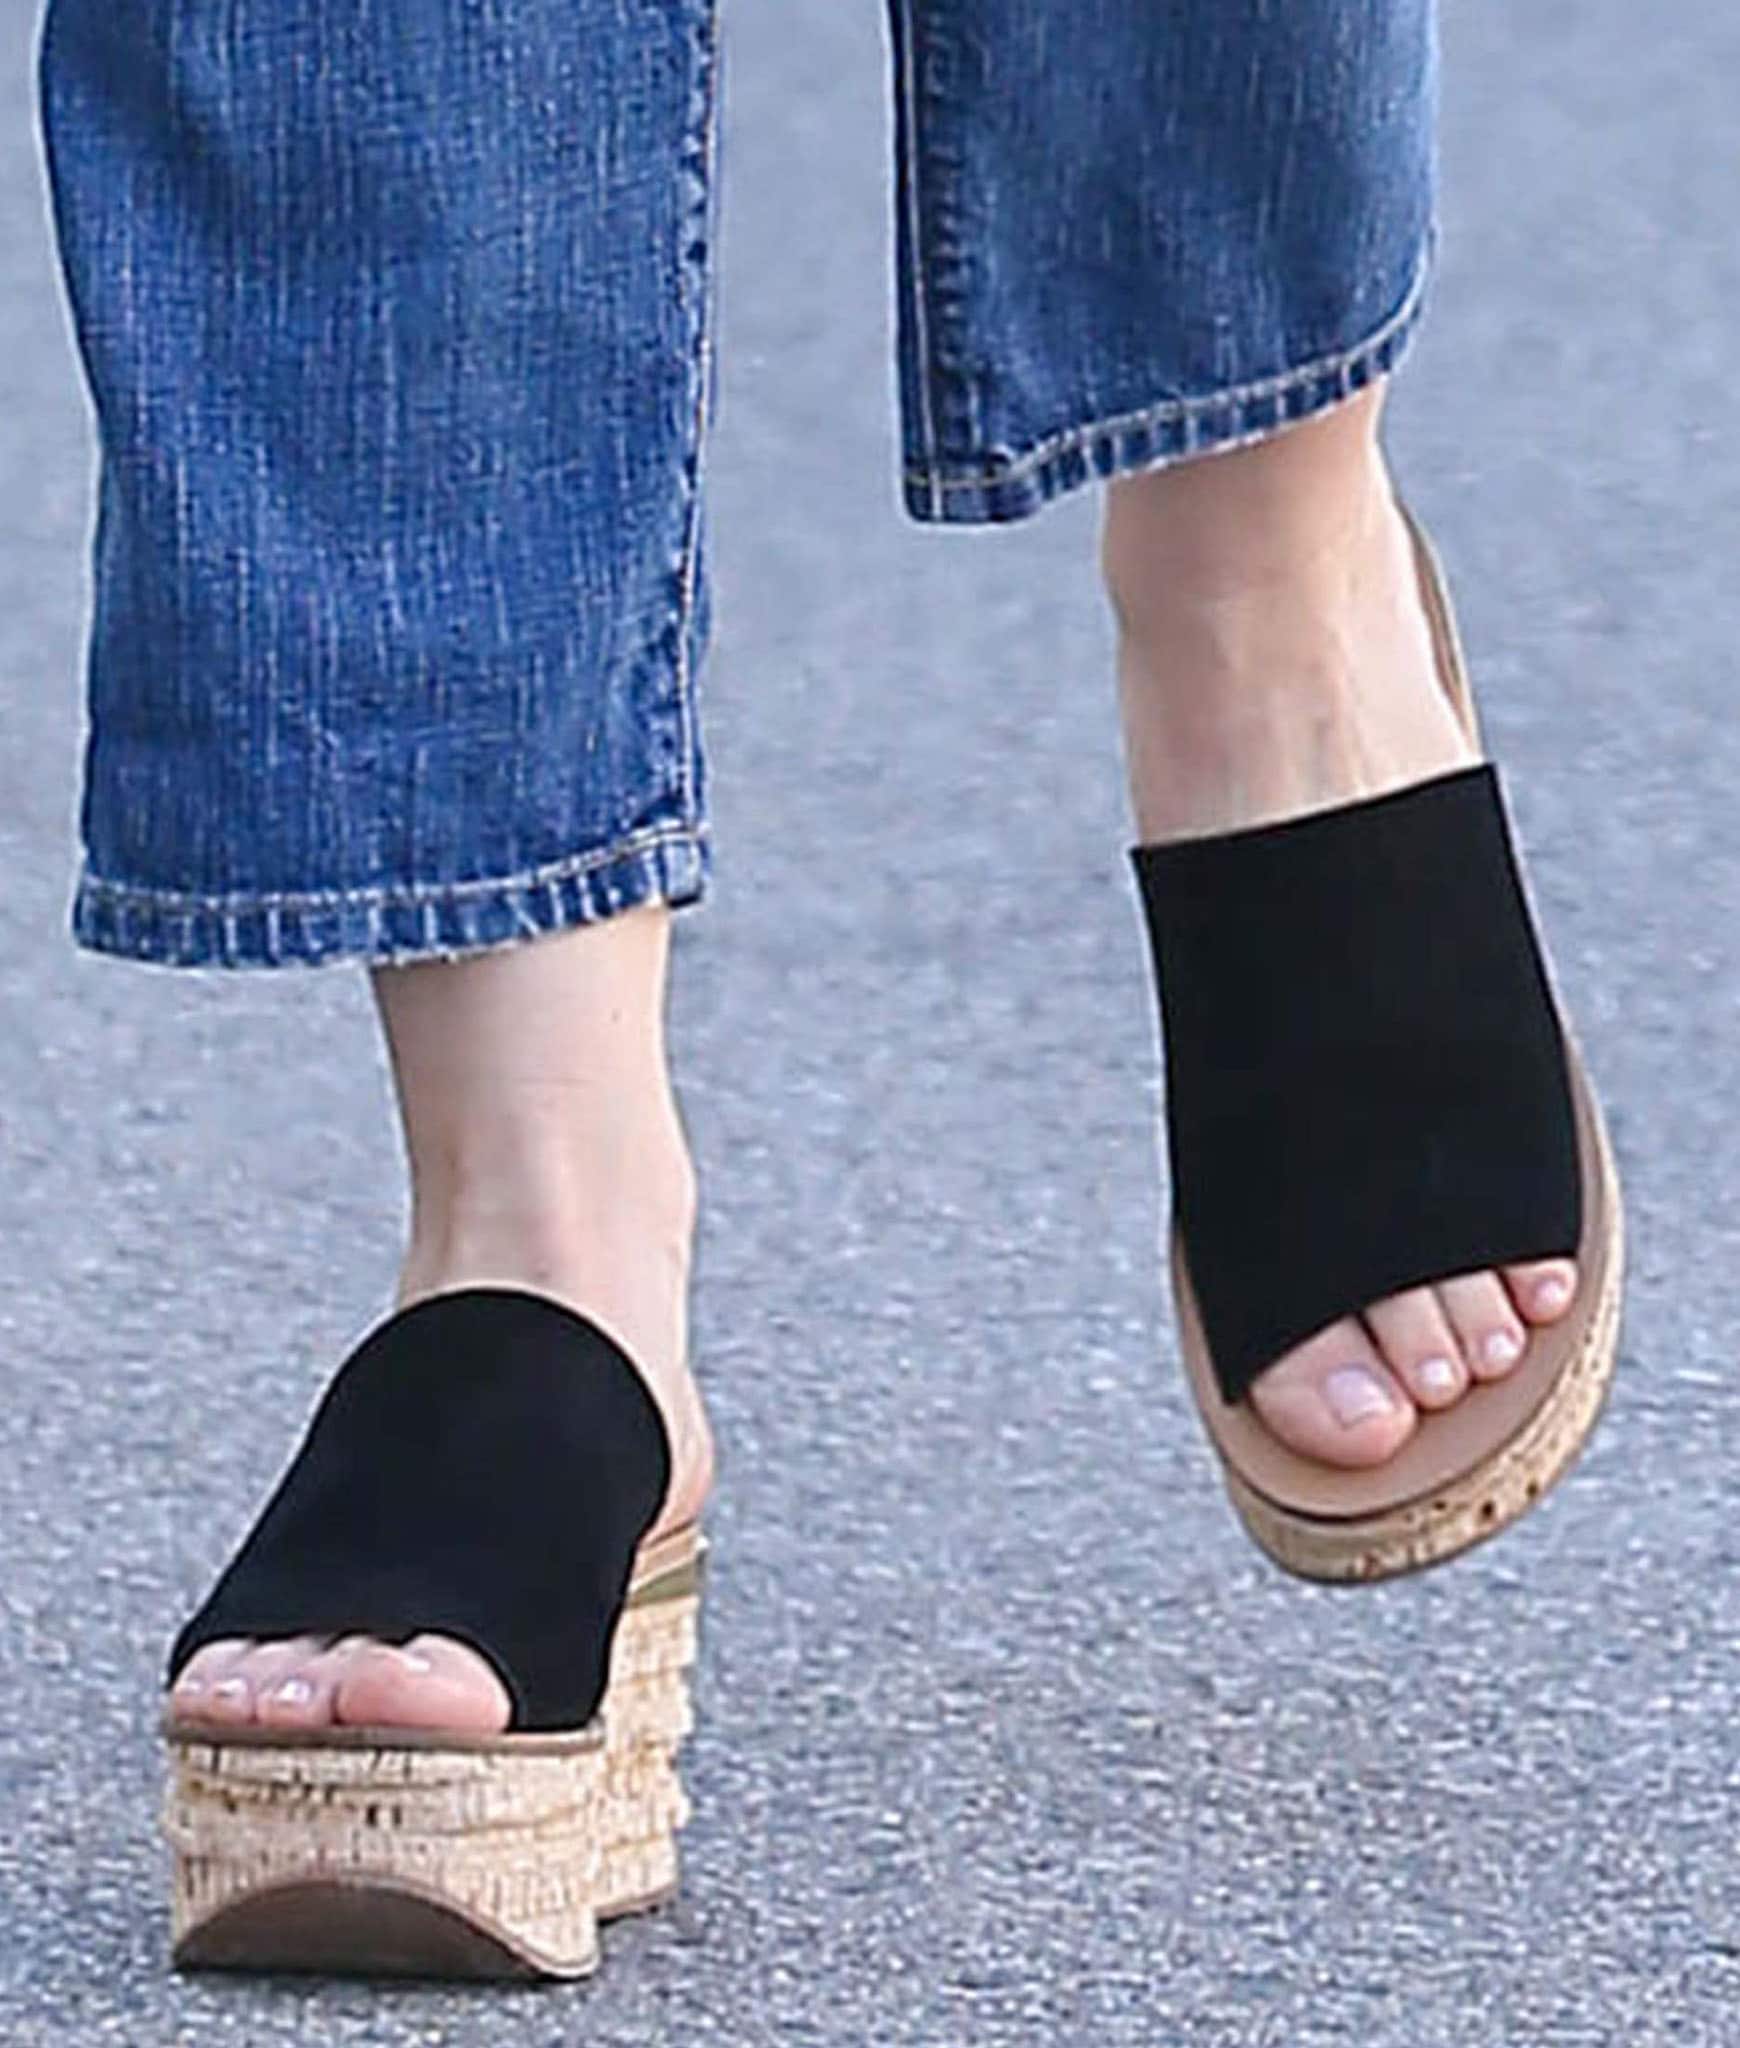 Sofia Vergara adds several inches to her height with Chloe's Camille cork wedge heels